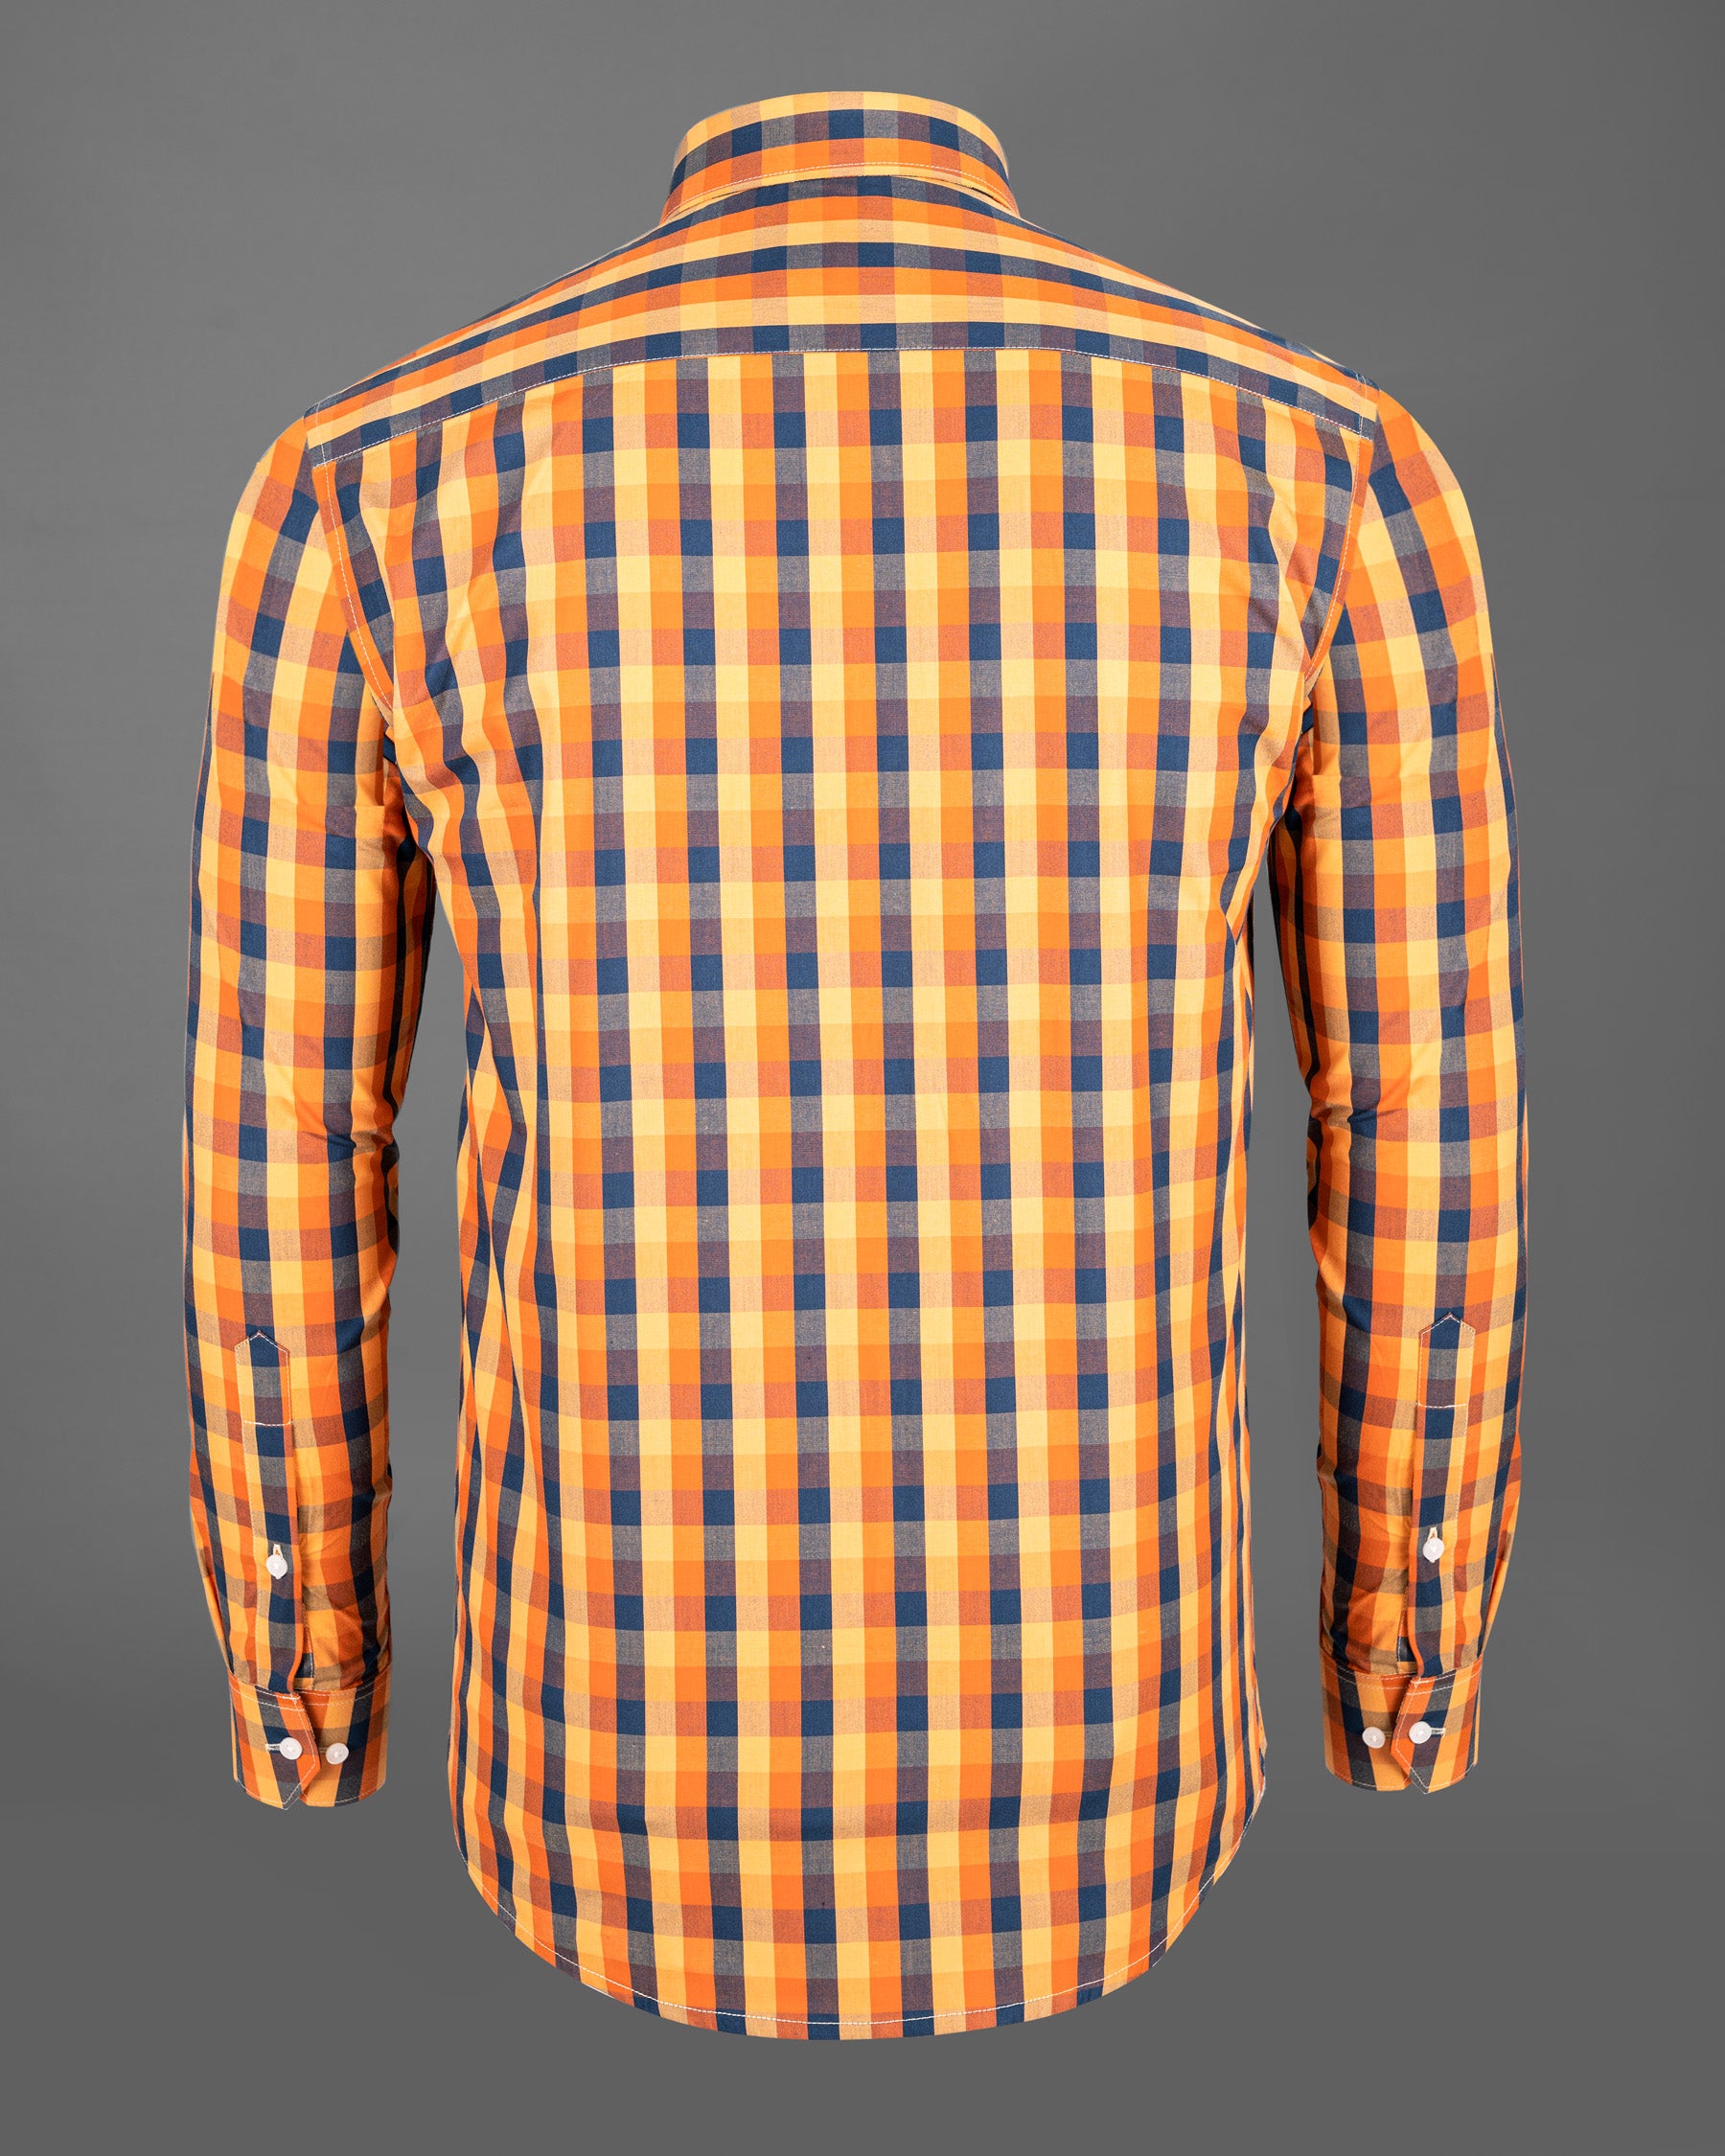 Tan Hide with Salomie and Blumine checked Premium Cotton Shirt 5089-BD-38, 5089-BD-H-38, 5089-BD-39, 5089-BD-H-39, 5089-BD-40, 5089-BD-H-40, 5089-BD-42, 5089-BD-H-42, 5089-BD-44, 5089-BD-H-44, 5089-BD-46, 5089-BD-H-46, 5089-BD-48, 5089-BD-H-48, 5089-BD-50, 5089-BD-H-50, 5089-BD-52, 5089-BD-H-52